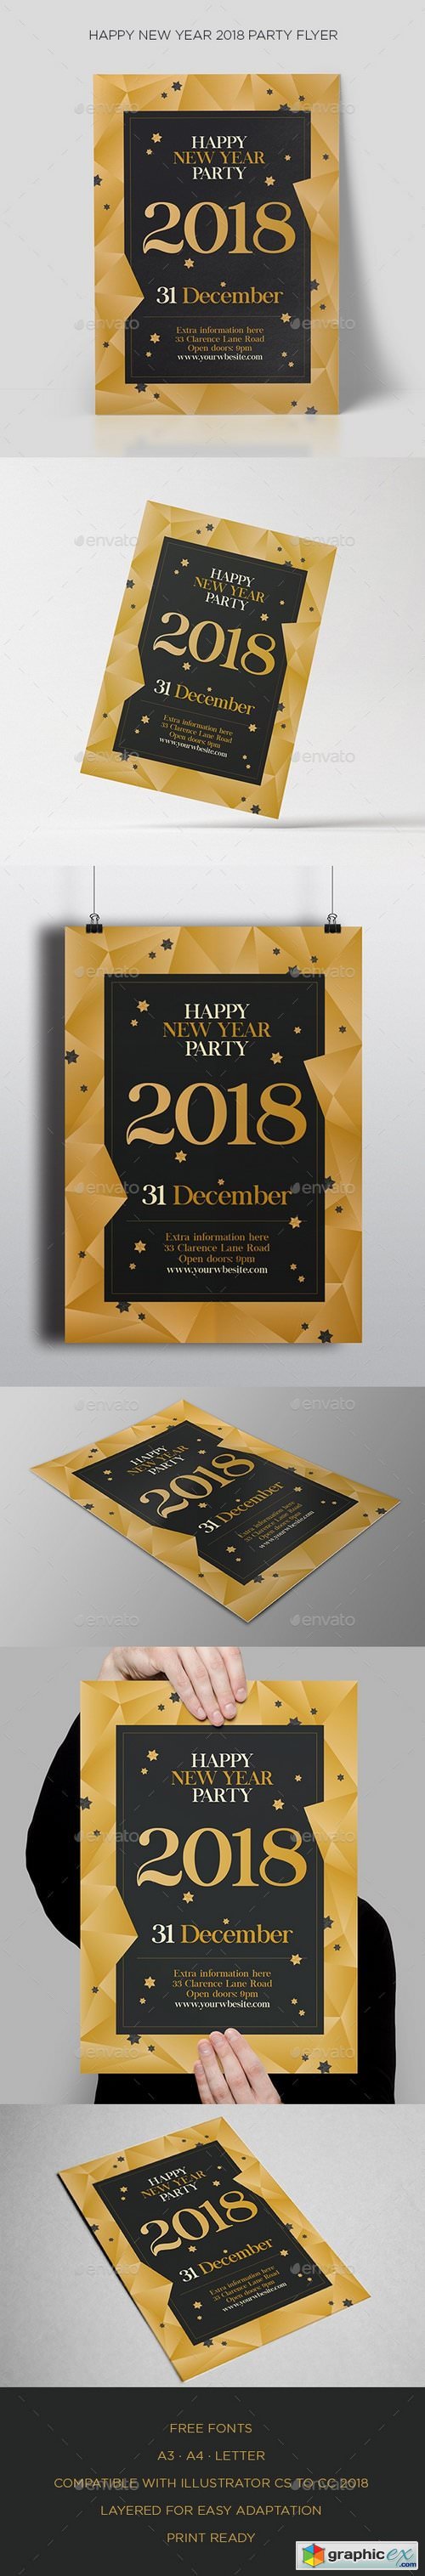 Happy New Year 2018 Party Flyer